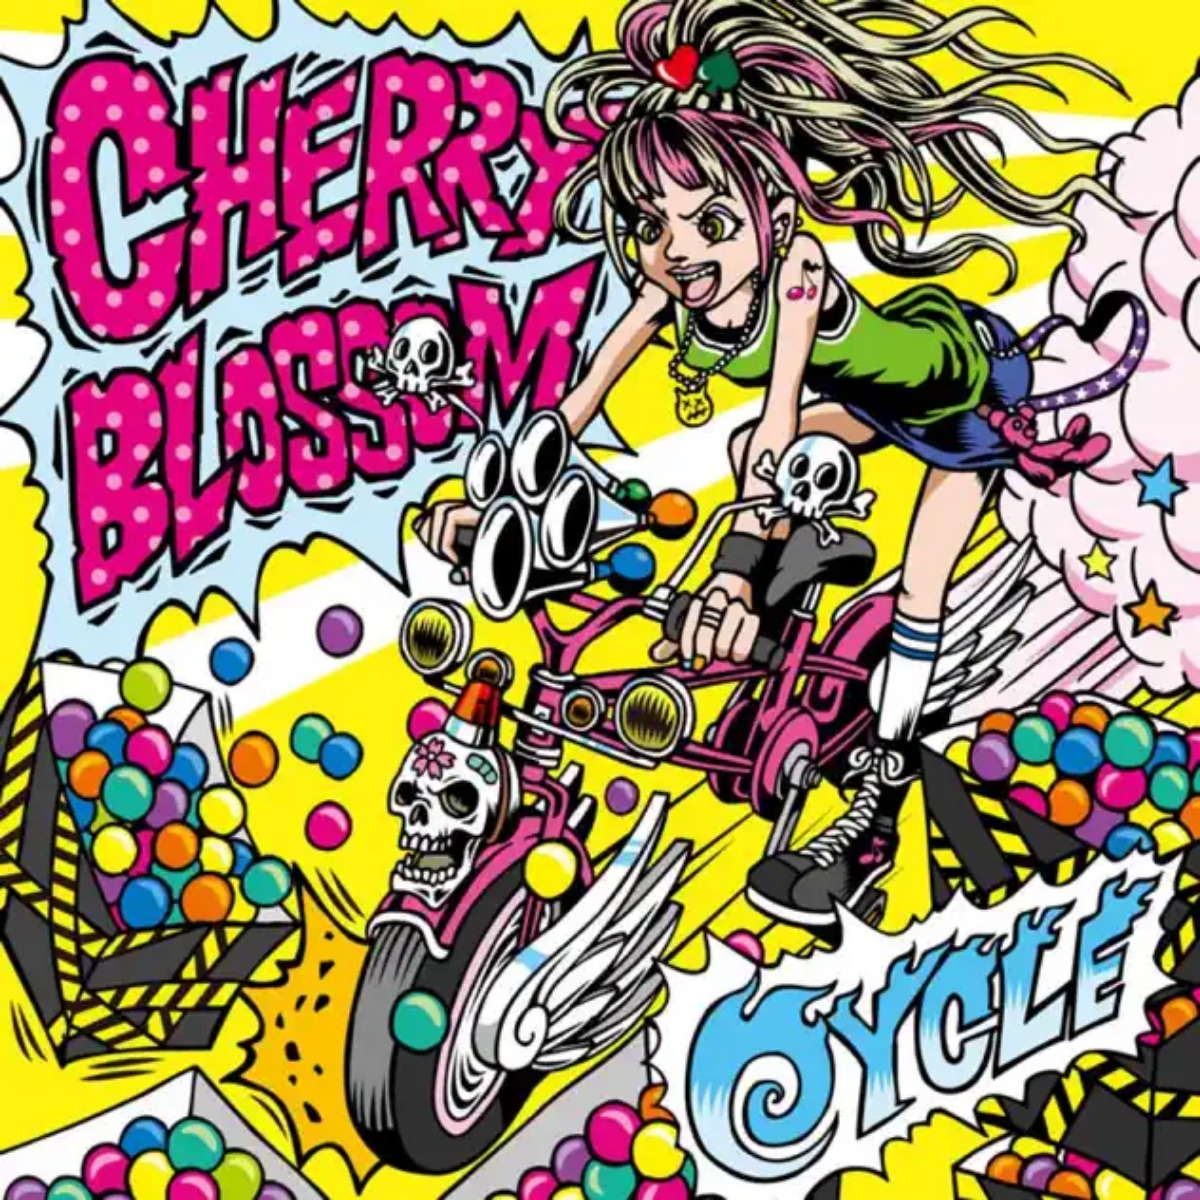 CHERRYBLOSSOM - CYCLE